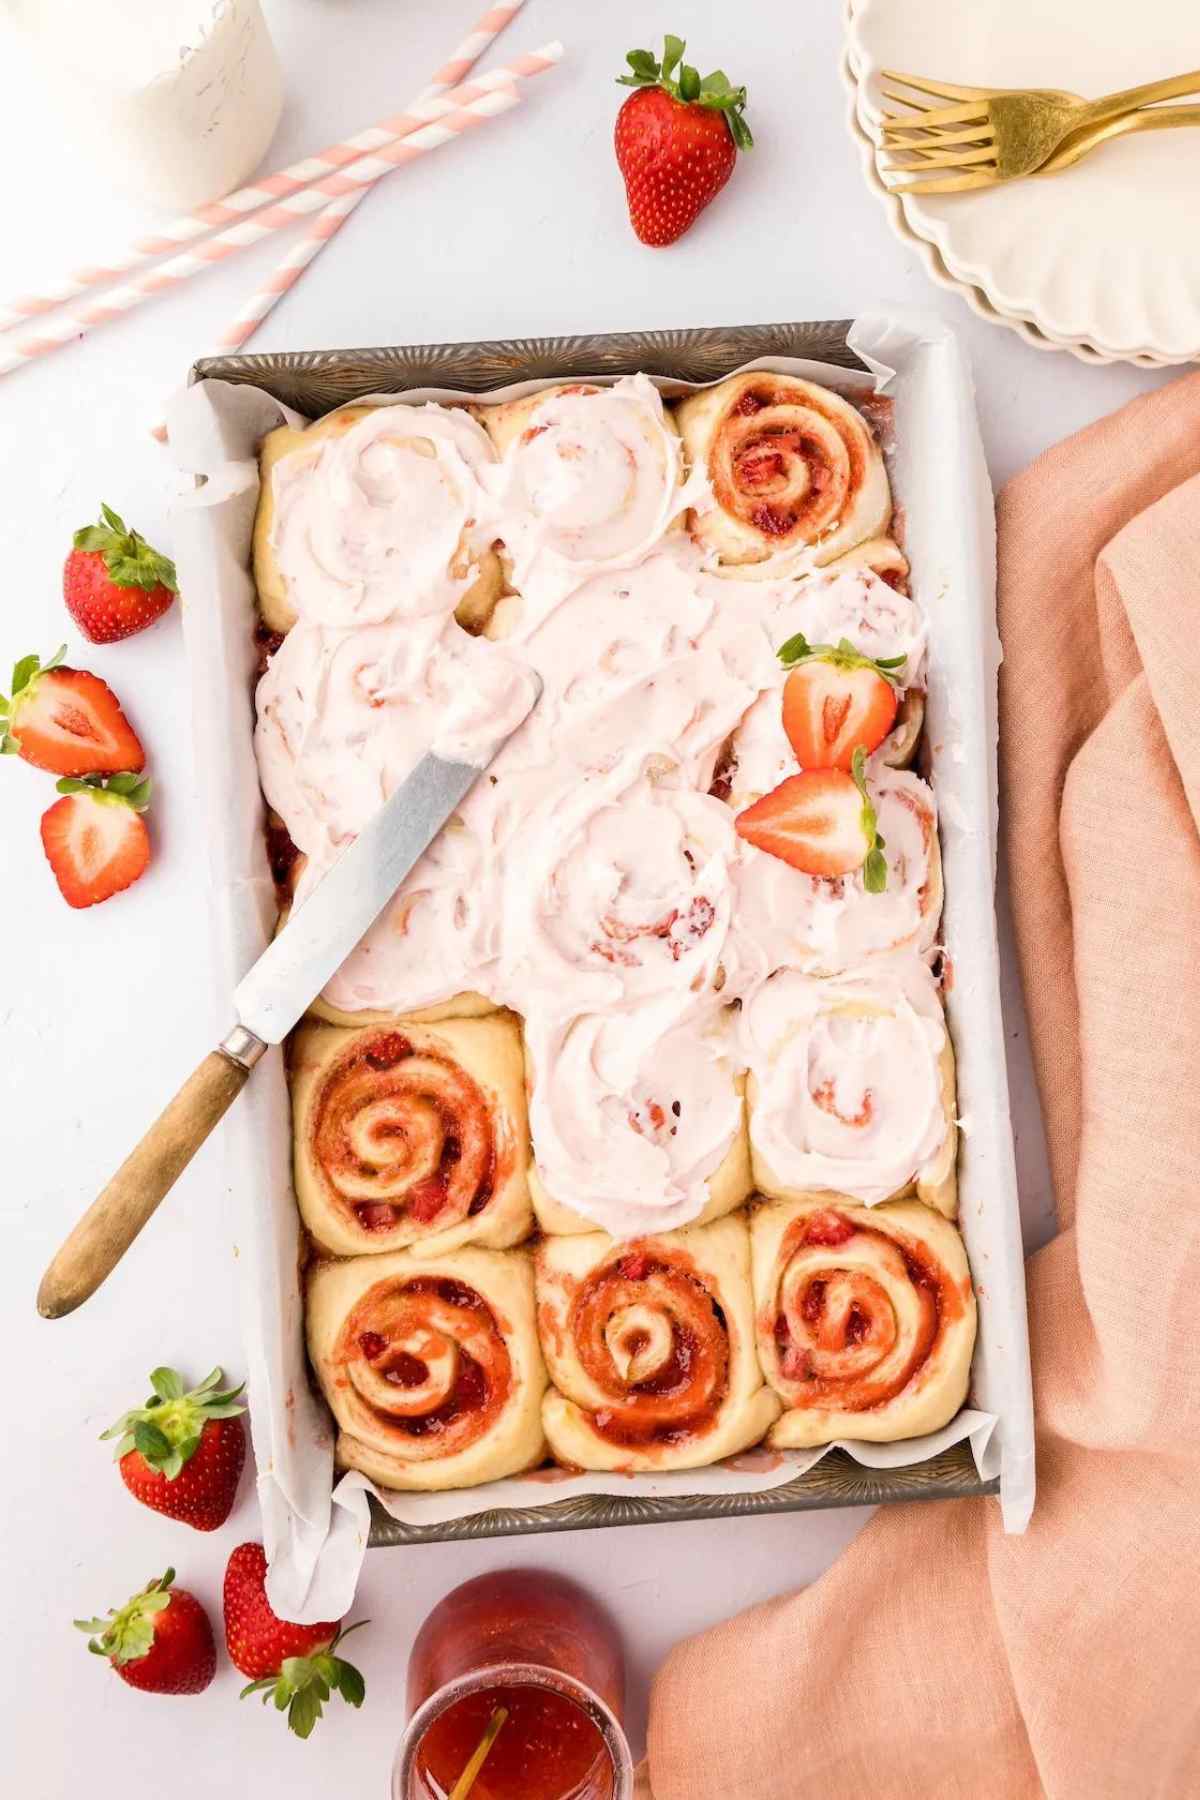 Casserole baking dish full of 12 strawberry cinnamon rolls being iced with pink icing.